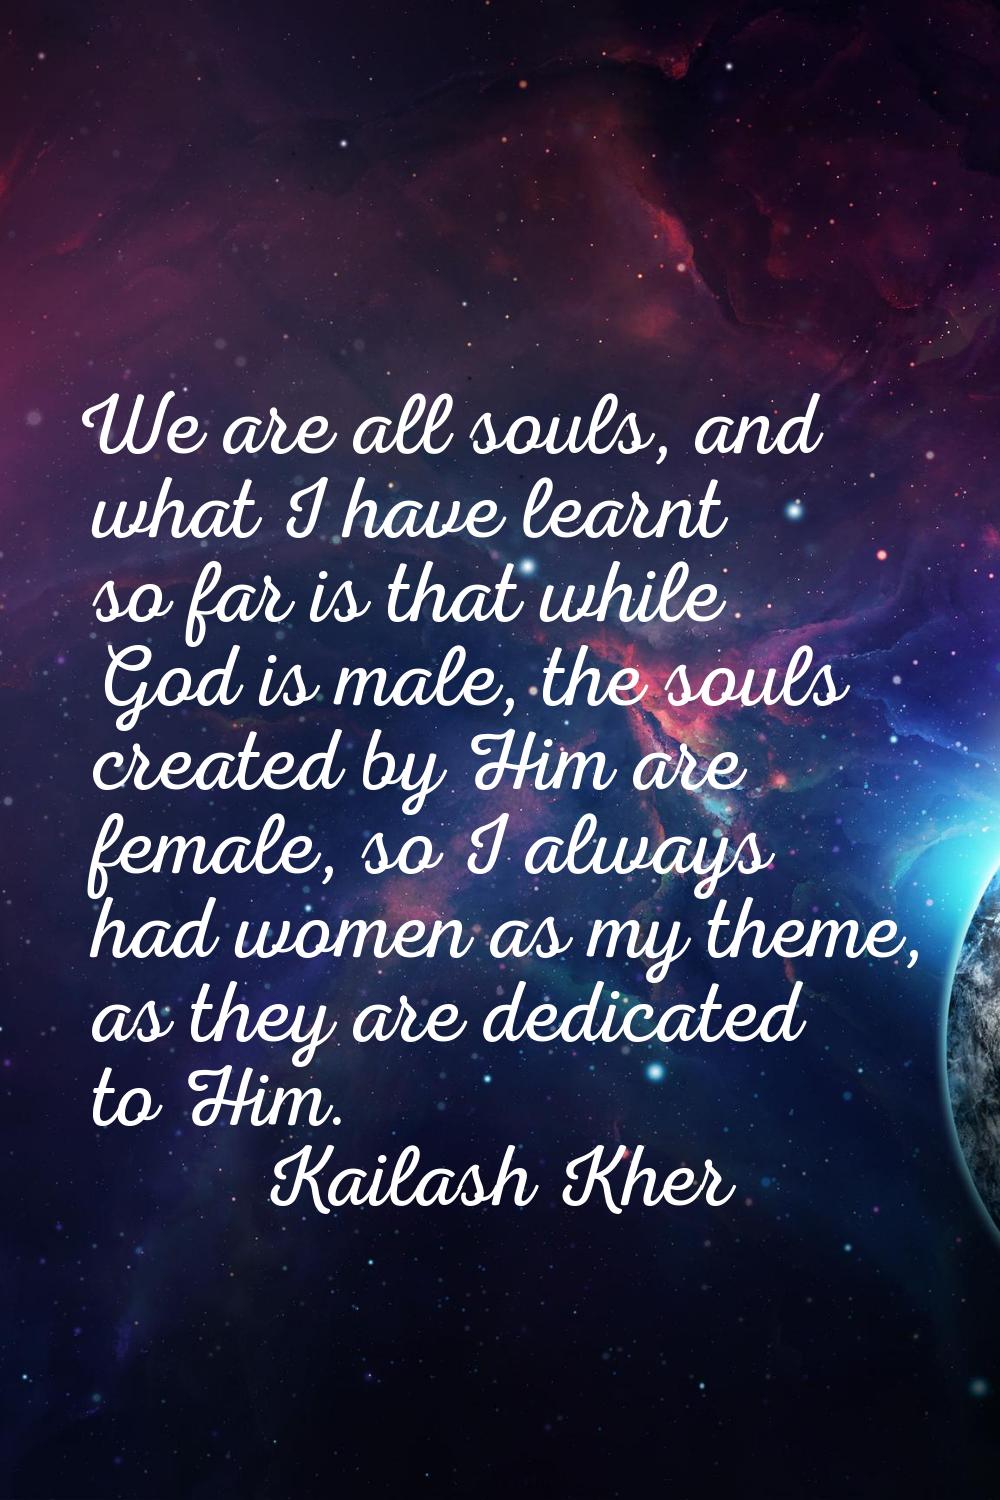 We are all souls, and what I have learnt so far is that while God is male, the souls created by Him